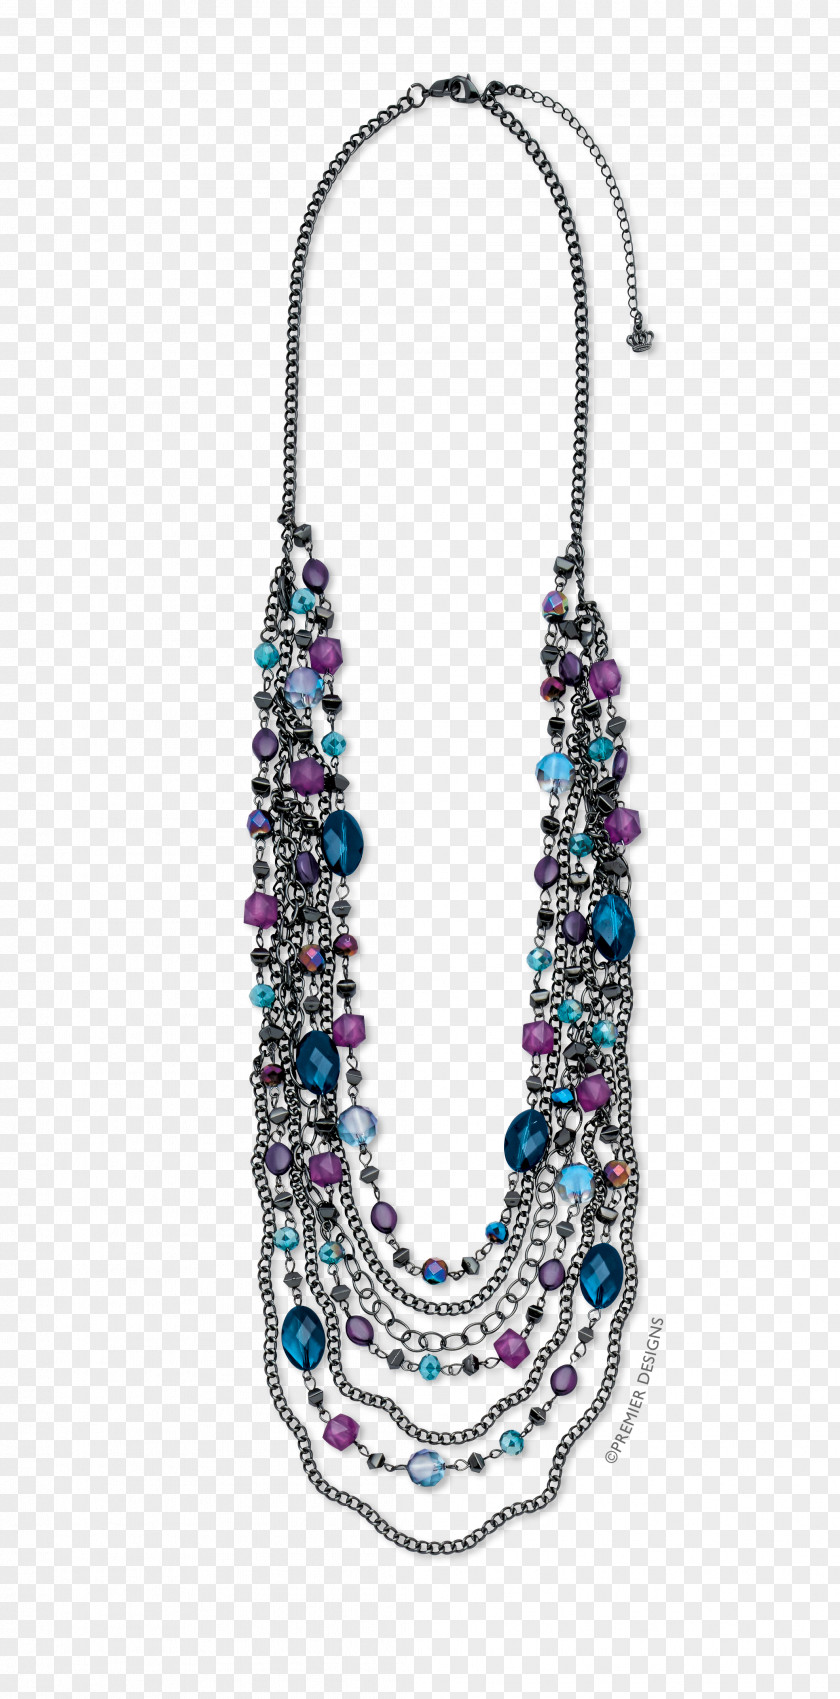 Necklace Turquoise Earring Premier Designs, Inc. Jewellery PNG